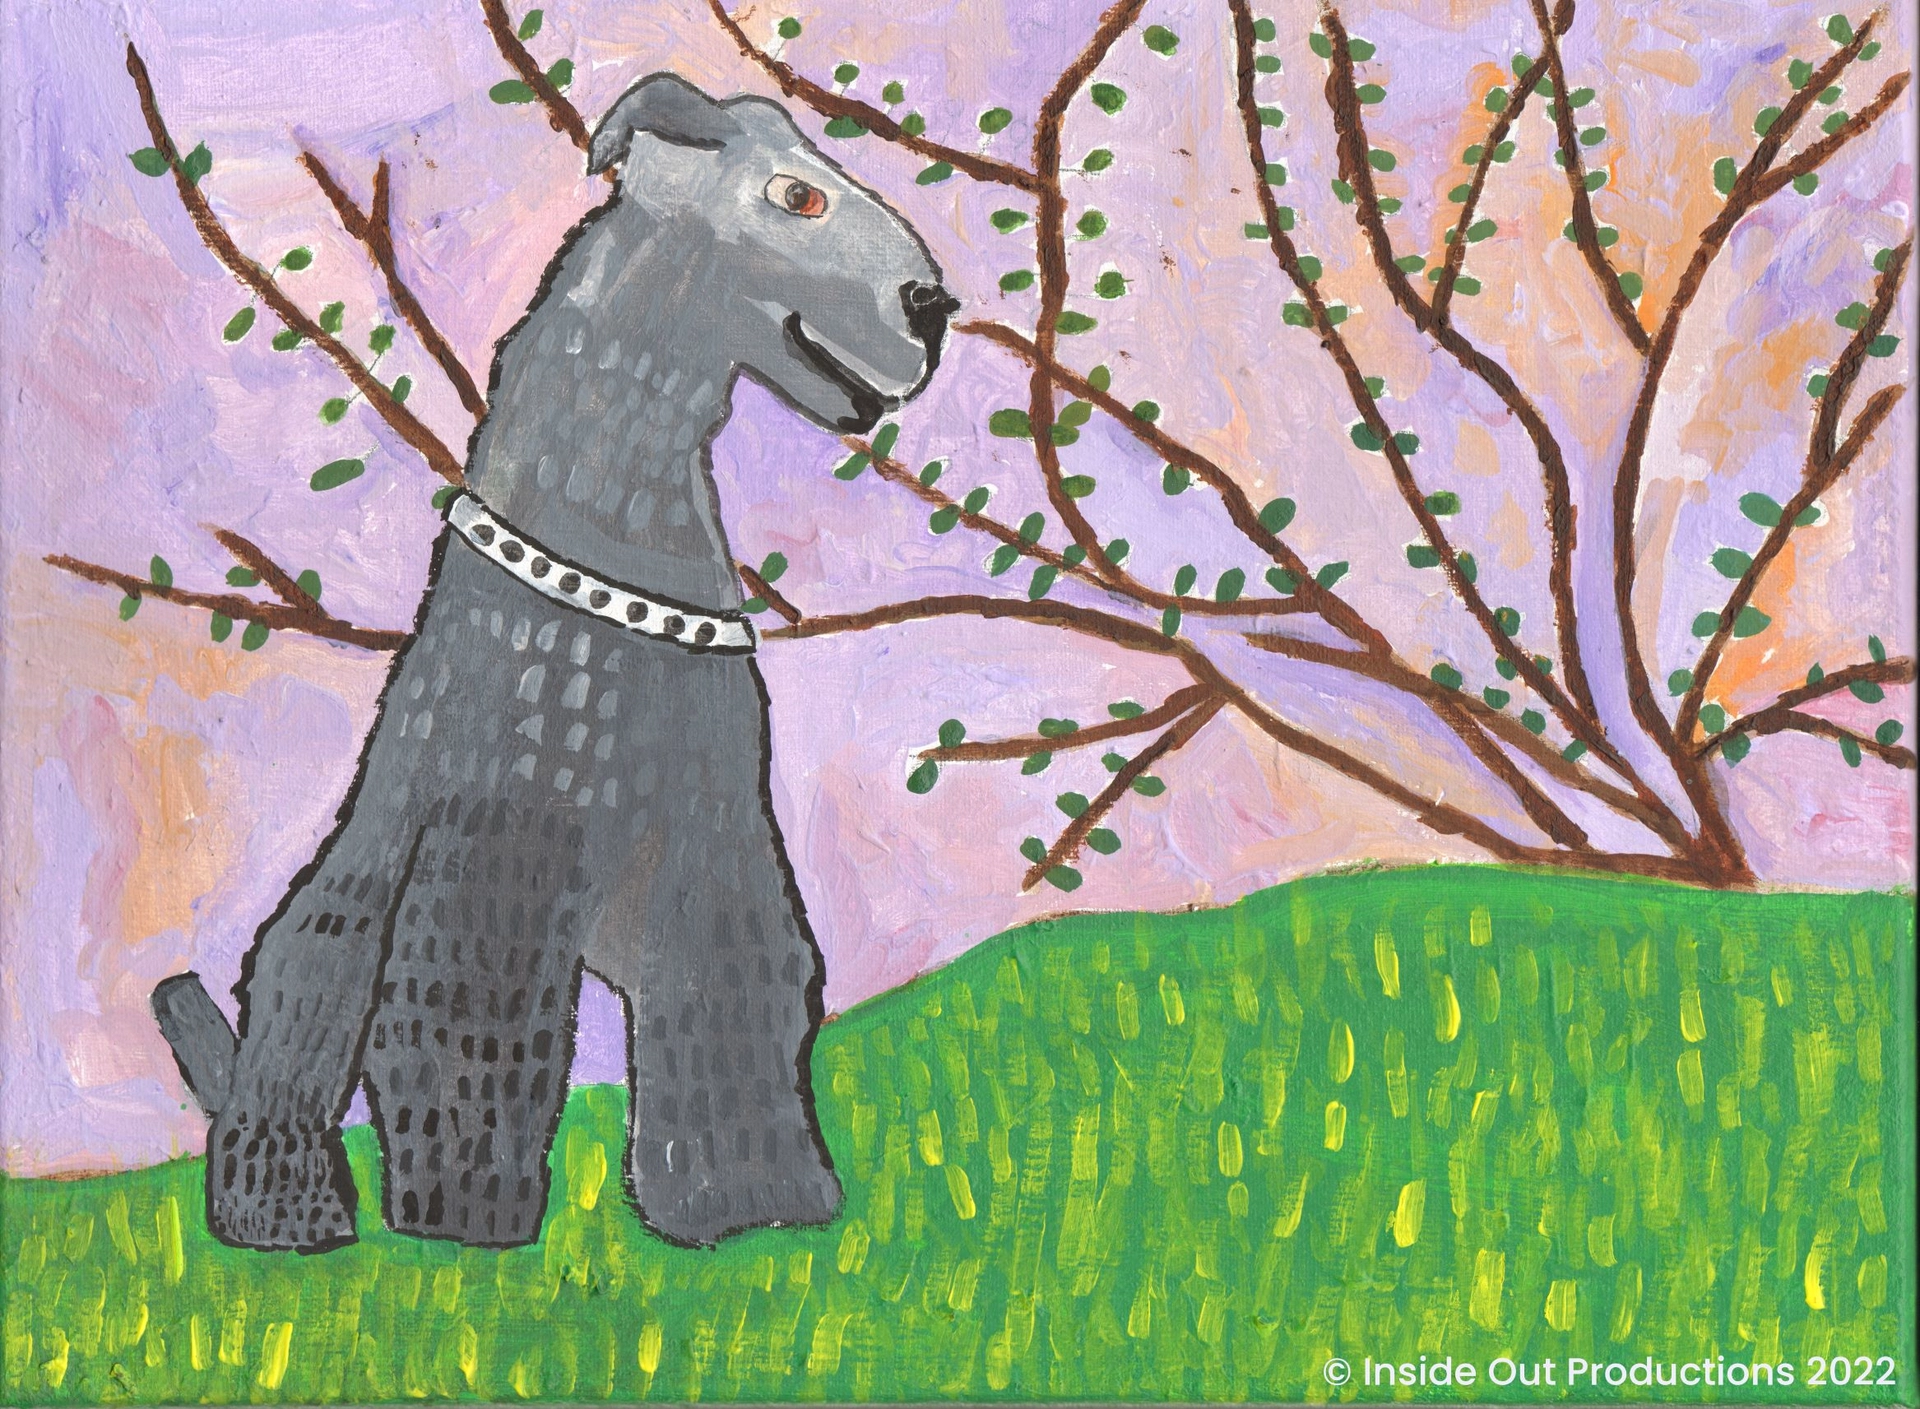 There is a tree with leaves, grass, and a gray dog named O’Malley is wearing a white collar. There are yellow highlights in the grass. It is morning, and the sky is painted in blues, purples, pinks, and oranges.